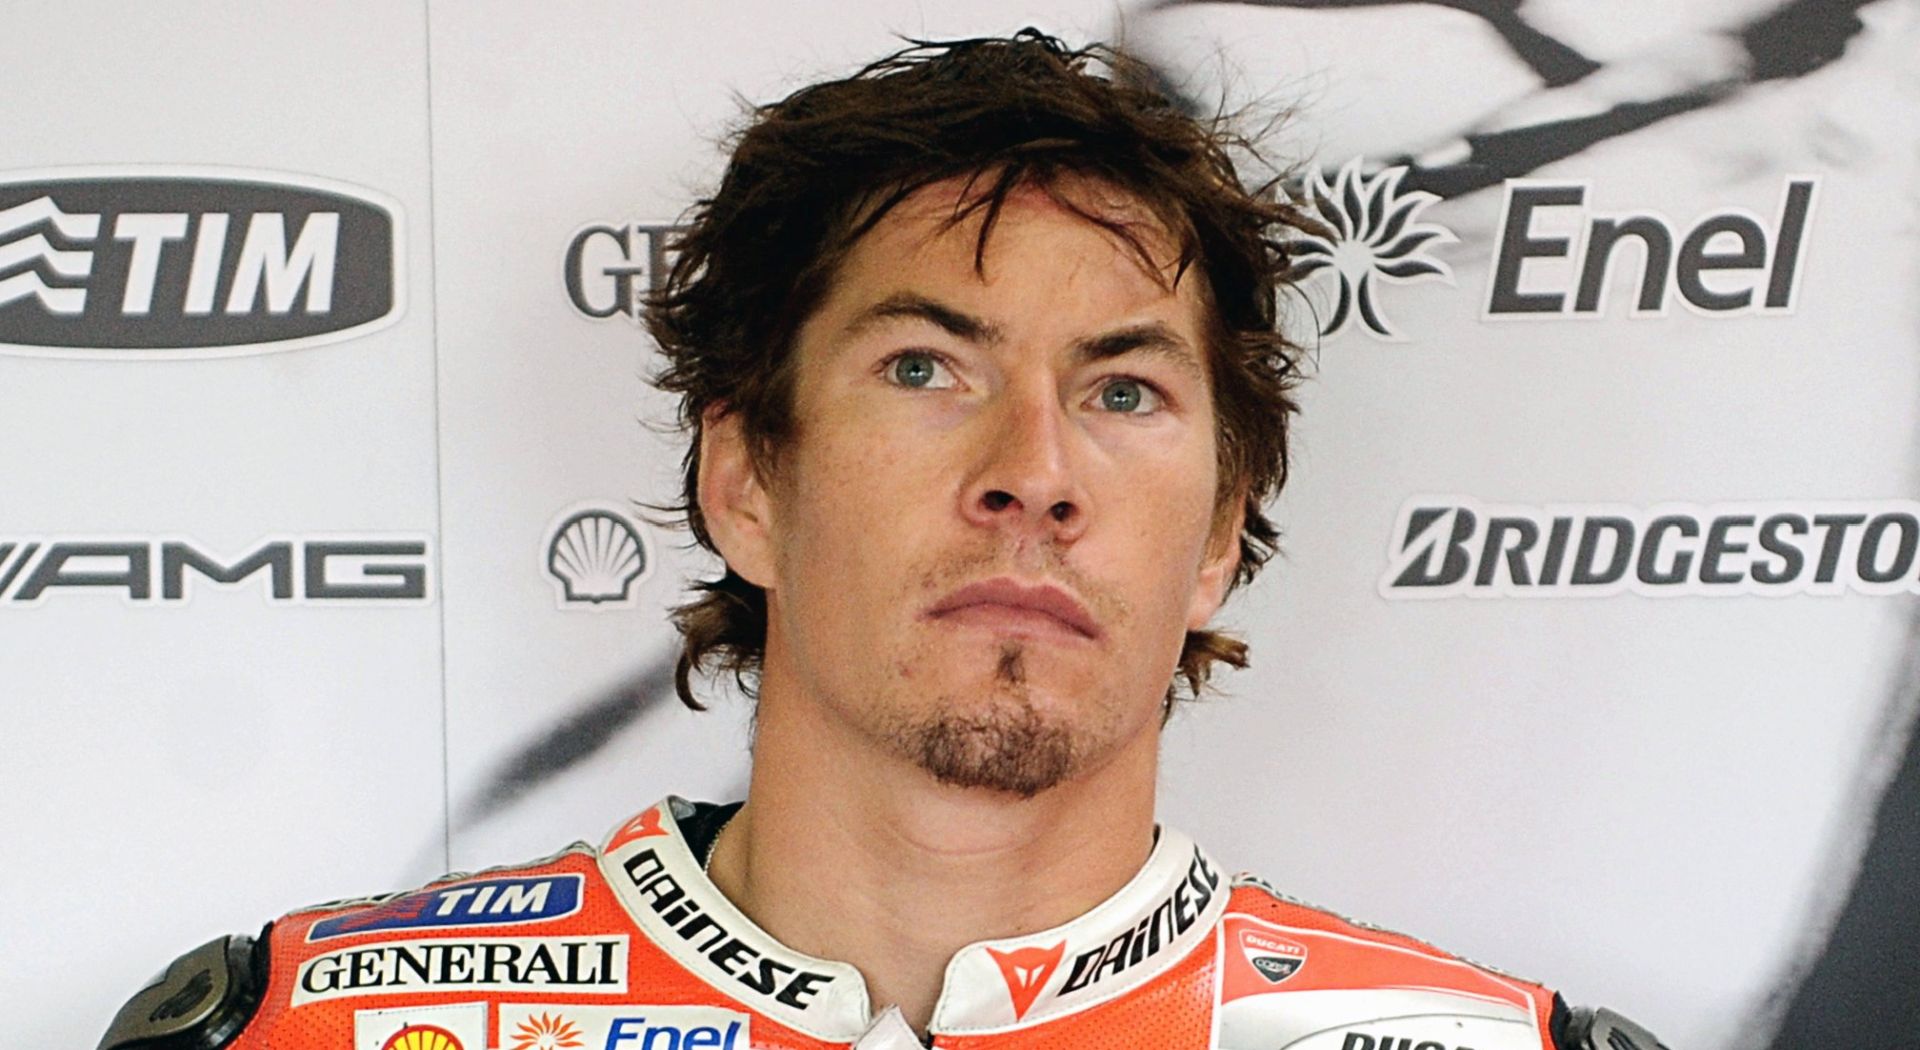 epa05982019 (FILE) - A file picture dated 12 August 2011 shows US MotoGP rider Nicky Hayden of Ducati team in his team's box before the MotoGP class free practice session at the Masaryk circuit in Brno, Czech Republic. Nicky Hayden died on 22 May 2017 from his injuries suffered in a road crash at the Maurizio Bufalini Hospital where he was hospitalised announced. Nicky Hayden was brought to hospital in serious condition with severe head and chest injuries after the road accident near Rimini.  EPA/FILIP SINGER